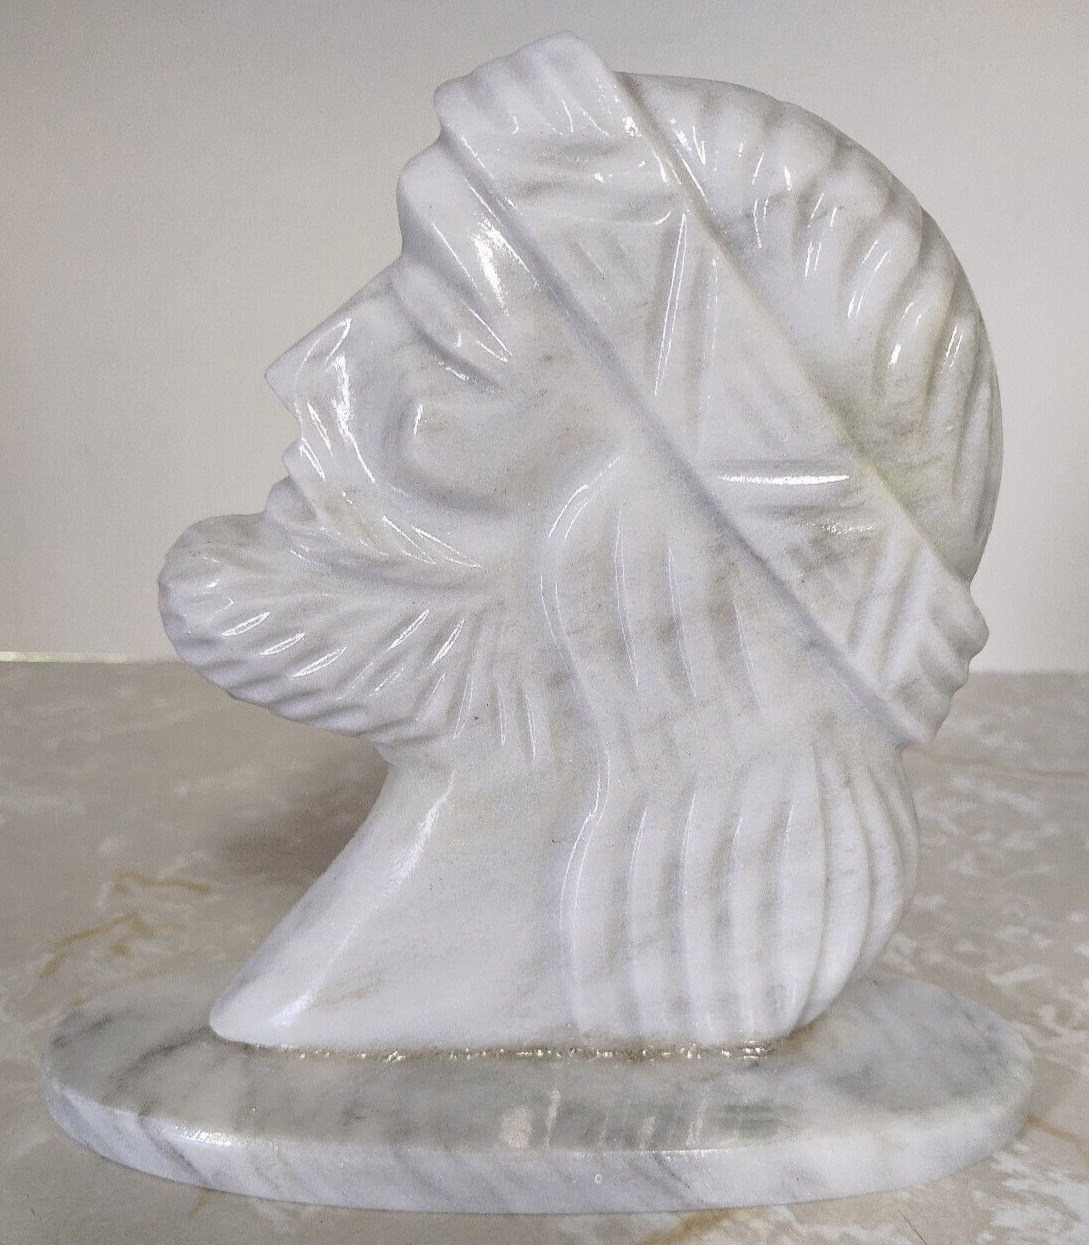 Jesus Marble Art Sculpture of Christ Head Profile 6.5 Inches Tall